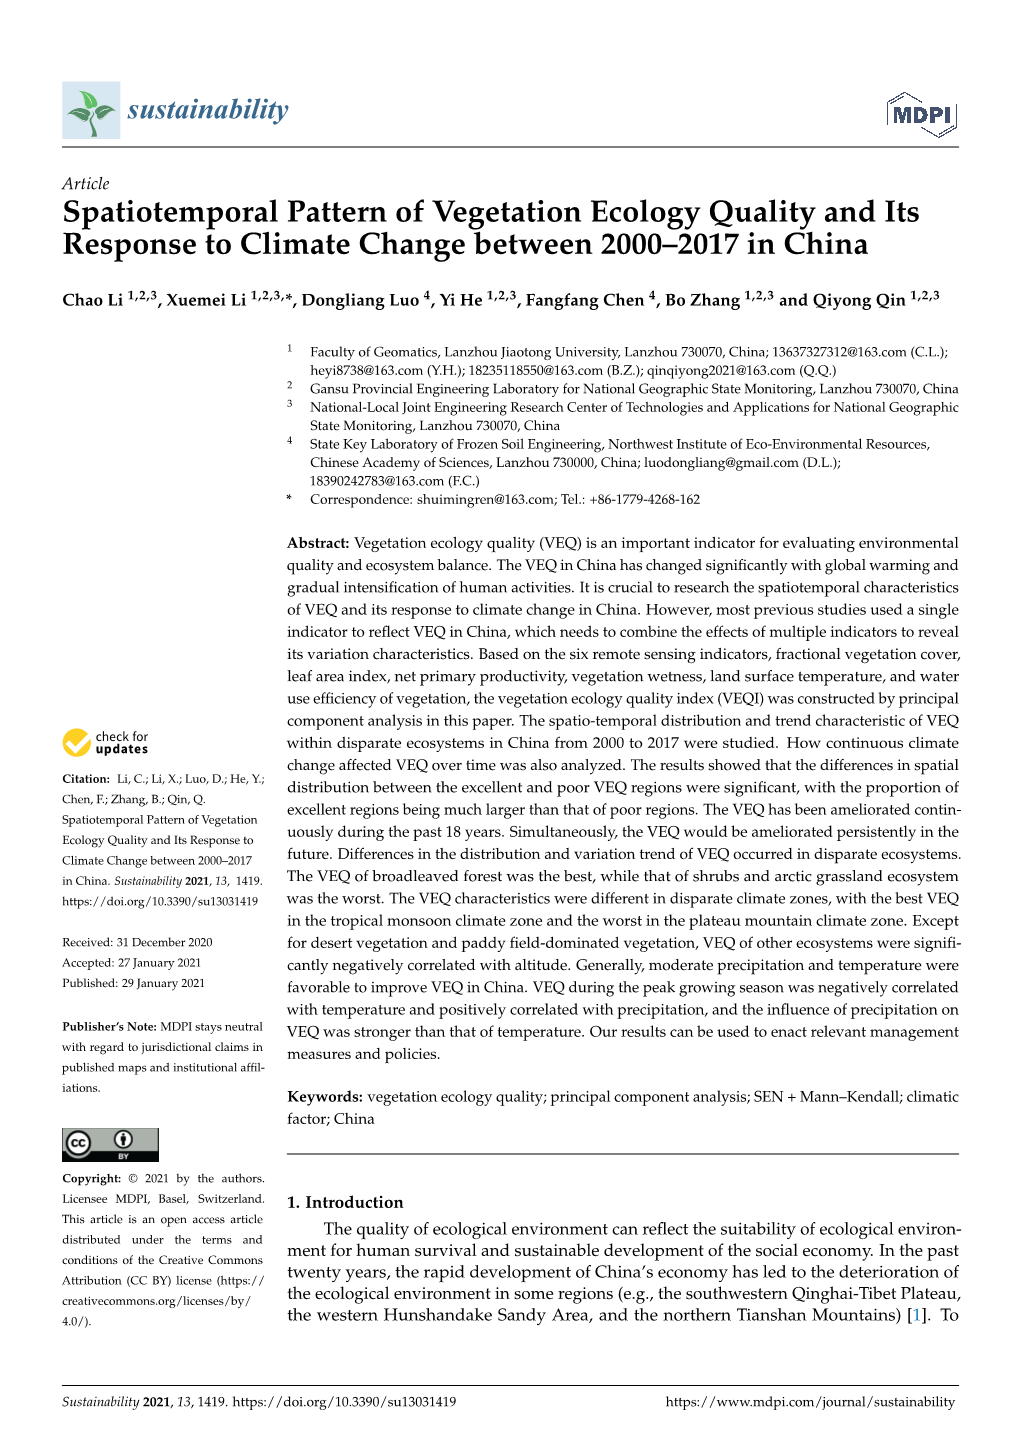 Spatiotemporal Pattern of Vegetation Ecology Quality and Its Response to Climate Change Between 2000–2017 in China